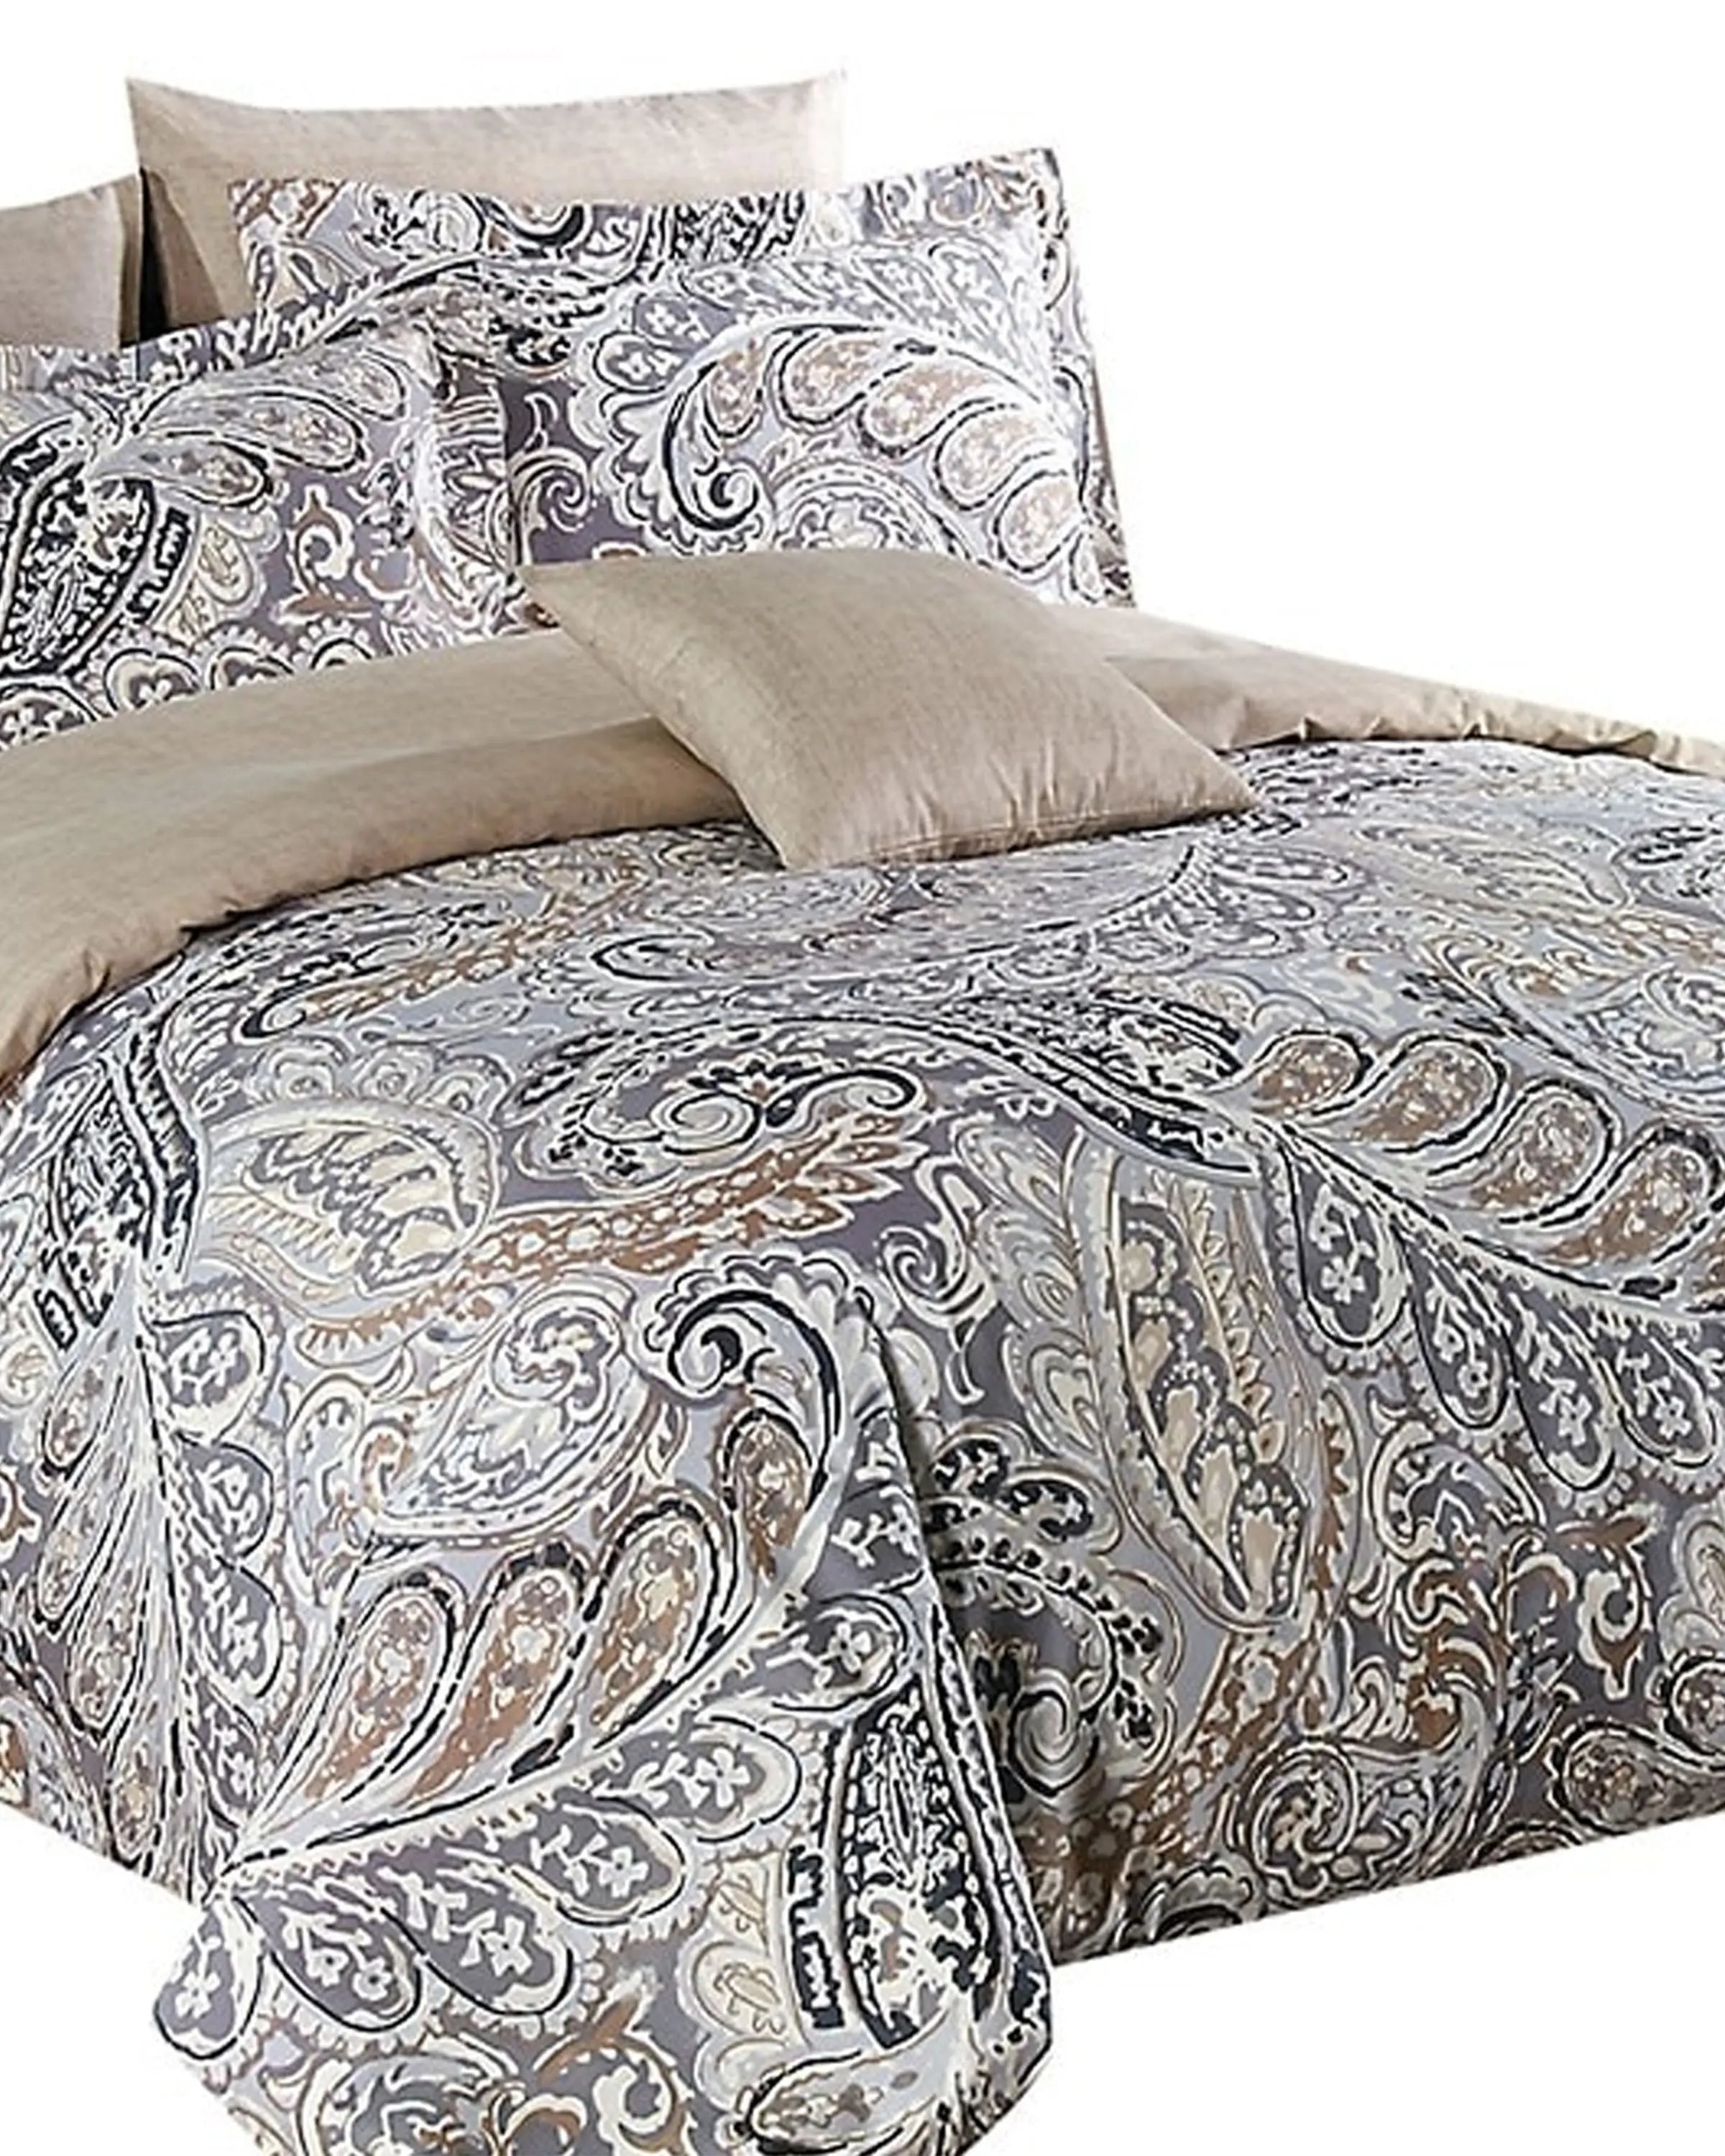 Abhay Beige & White Printed Bedsheet Set ANGIE HOMES